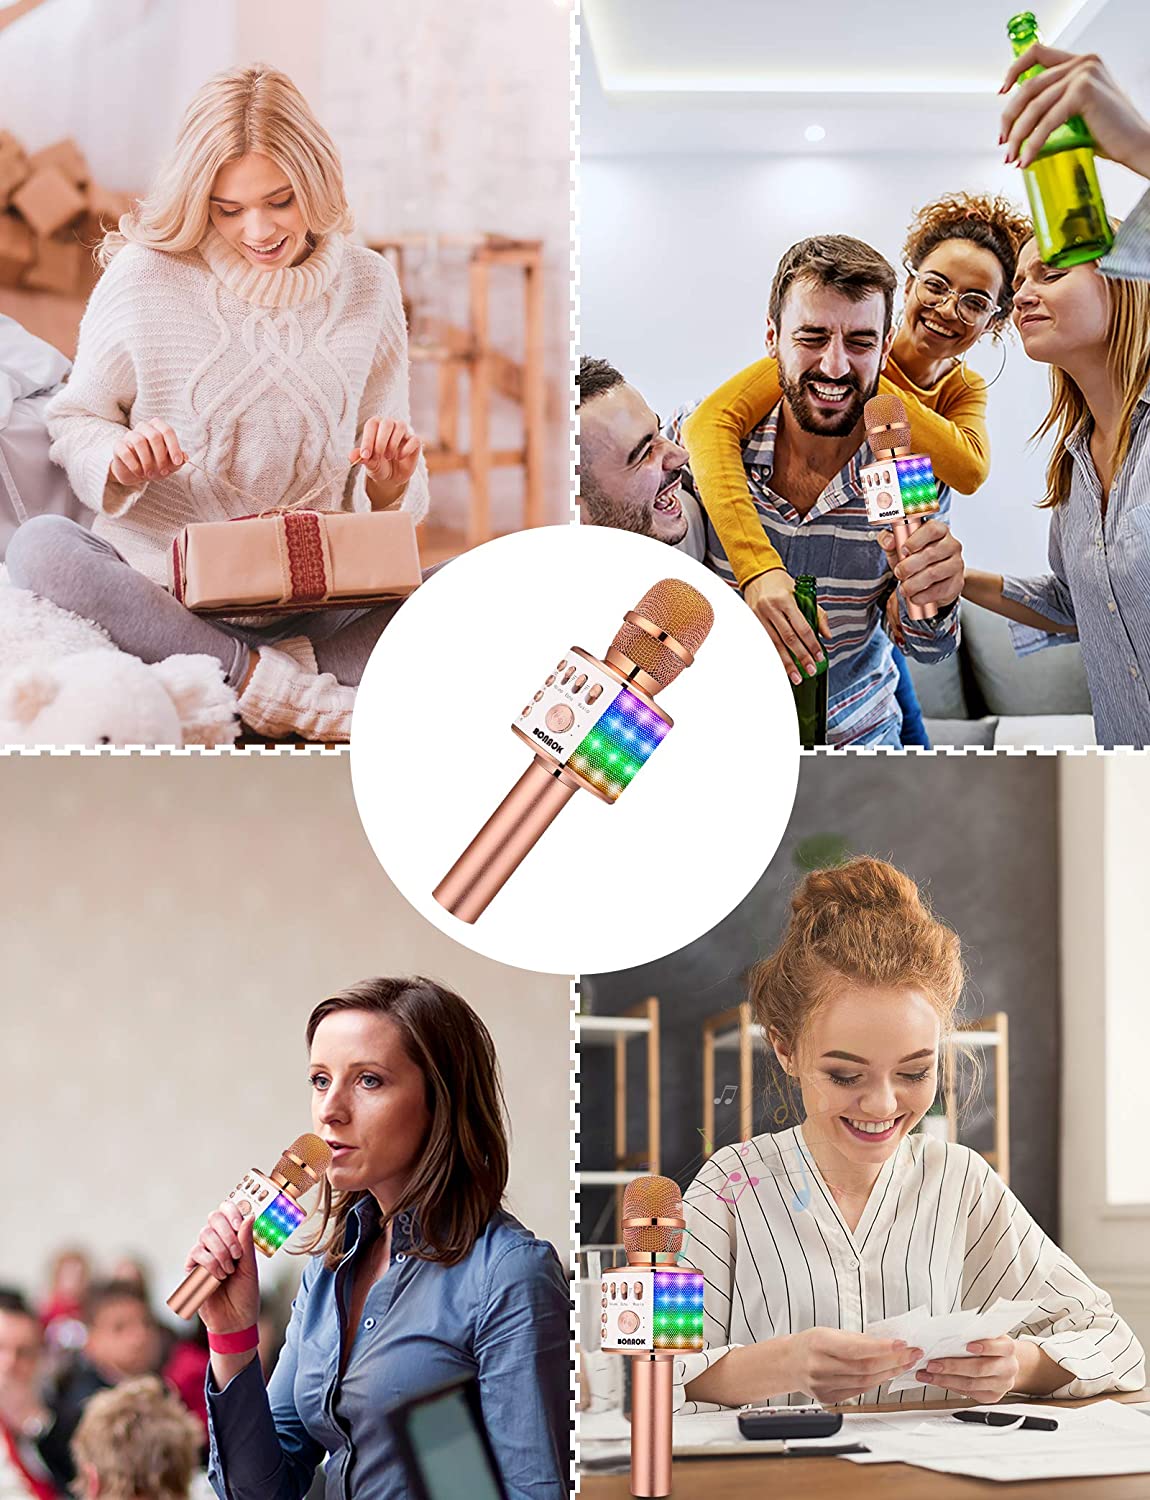 BONAOK Karaoke Microphone for Kids, 4 in 1 Portable Bluetooth Mic Speaker with Controllable LED Lights, Great Gift for 4 5 6 7 8 9 10 Years Old Girls, Teens and Adults Q37L (Rose Gold)